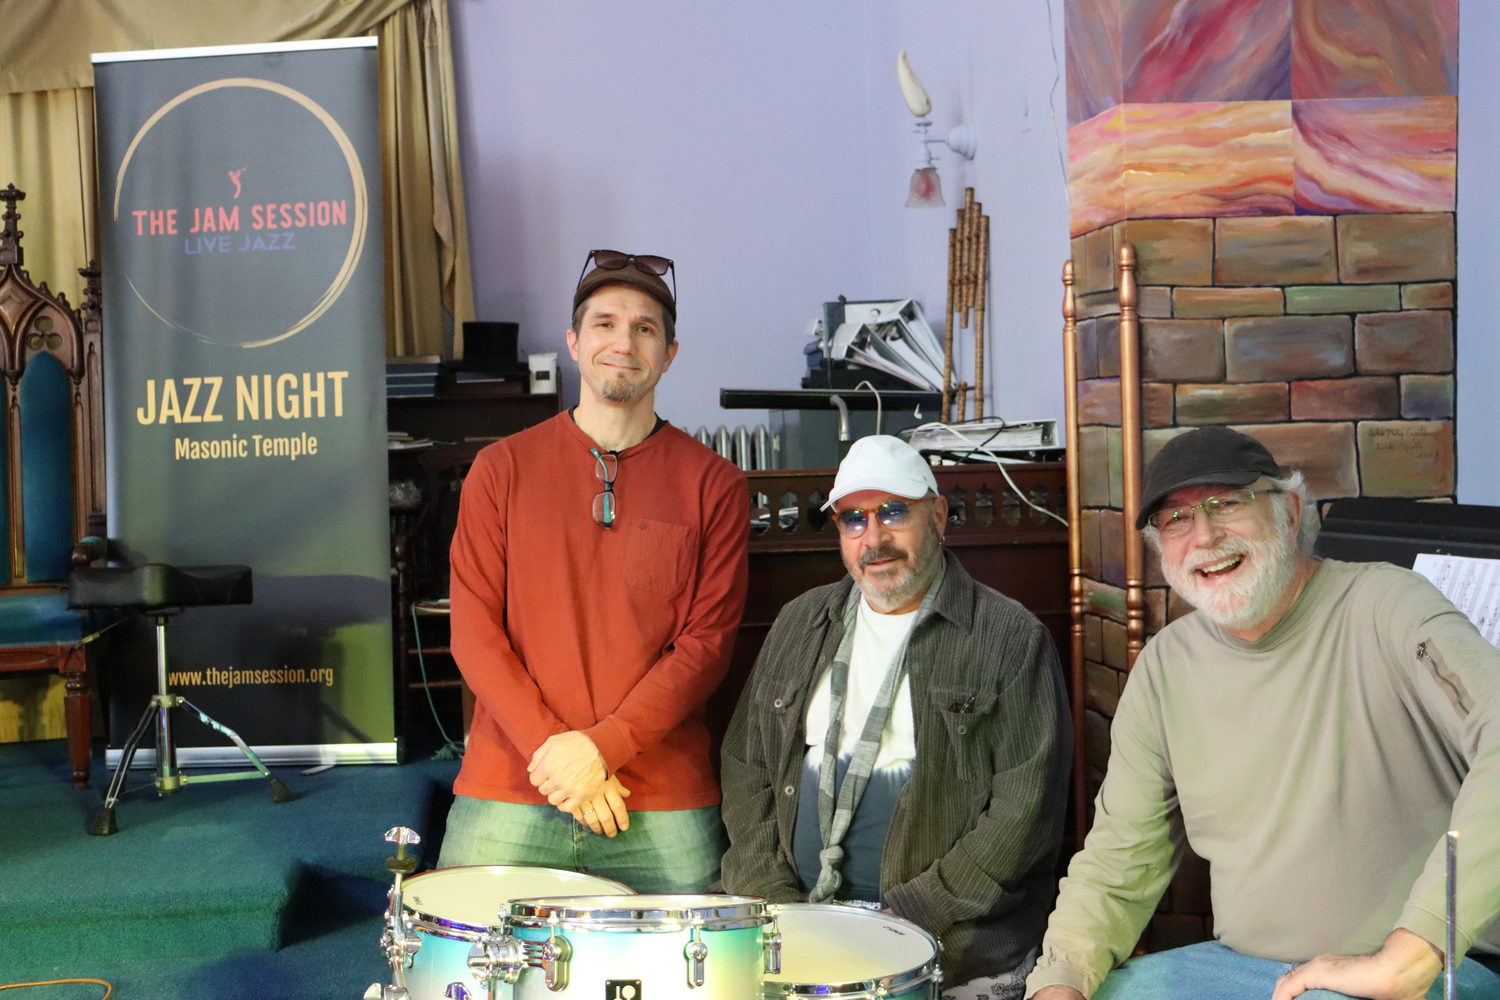 From left, Claes Brondal, Joel Chriss, and creative director Bill O'Connell at the Masonic Temple, on the second floor of the Whaling Museum, where weekly jazz nights events are held throughout the year. CAILIN RILEY